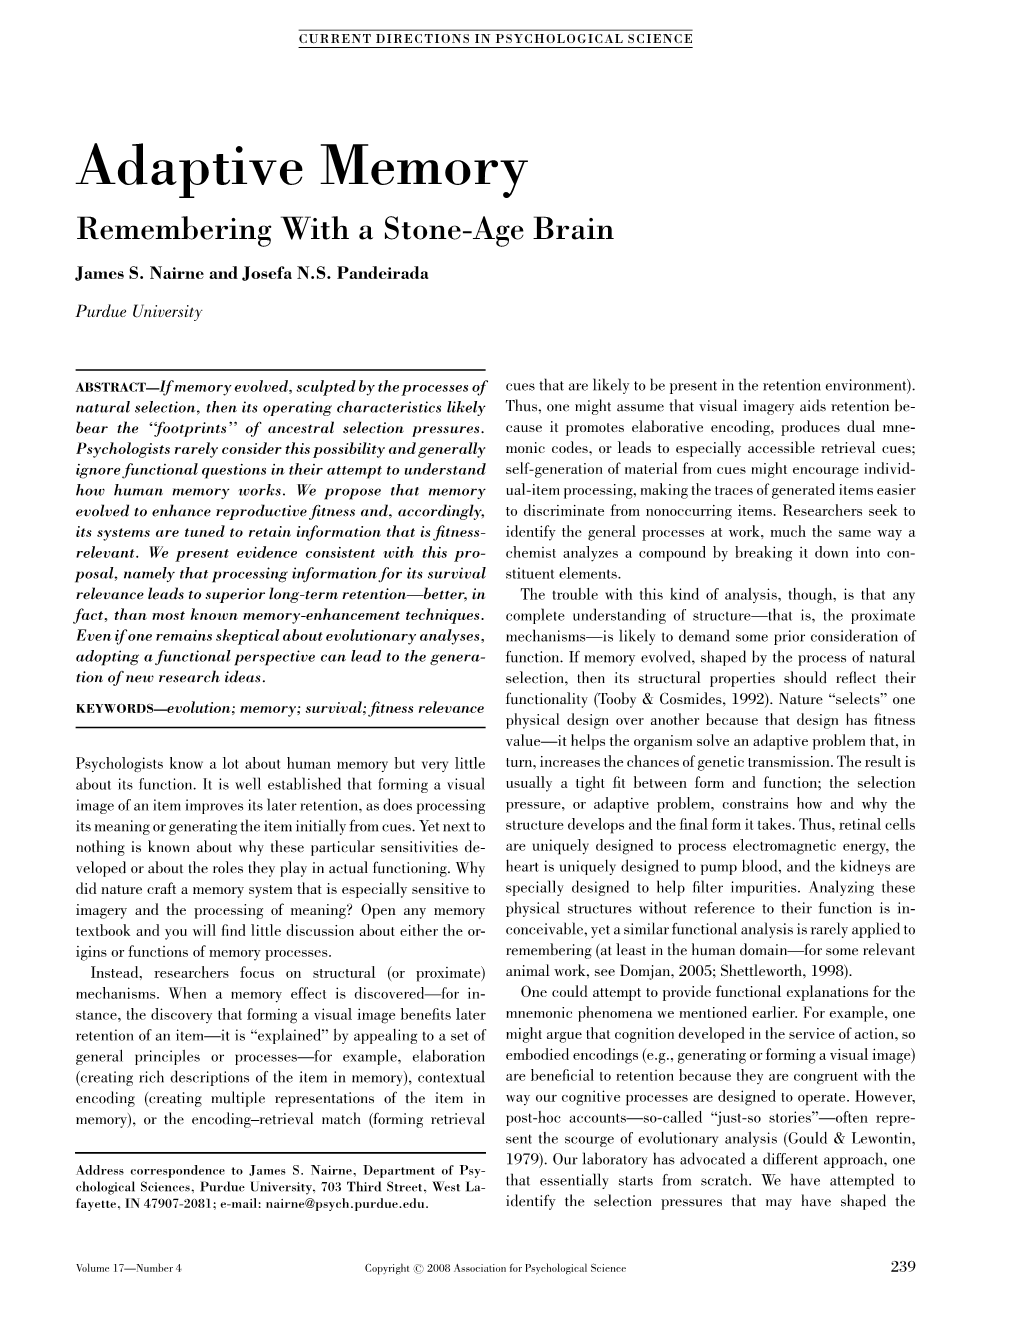 Adaptive Memory: Remembering with a Stone-Age Brain